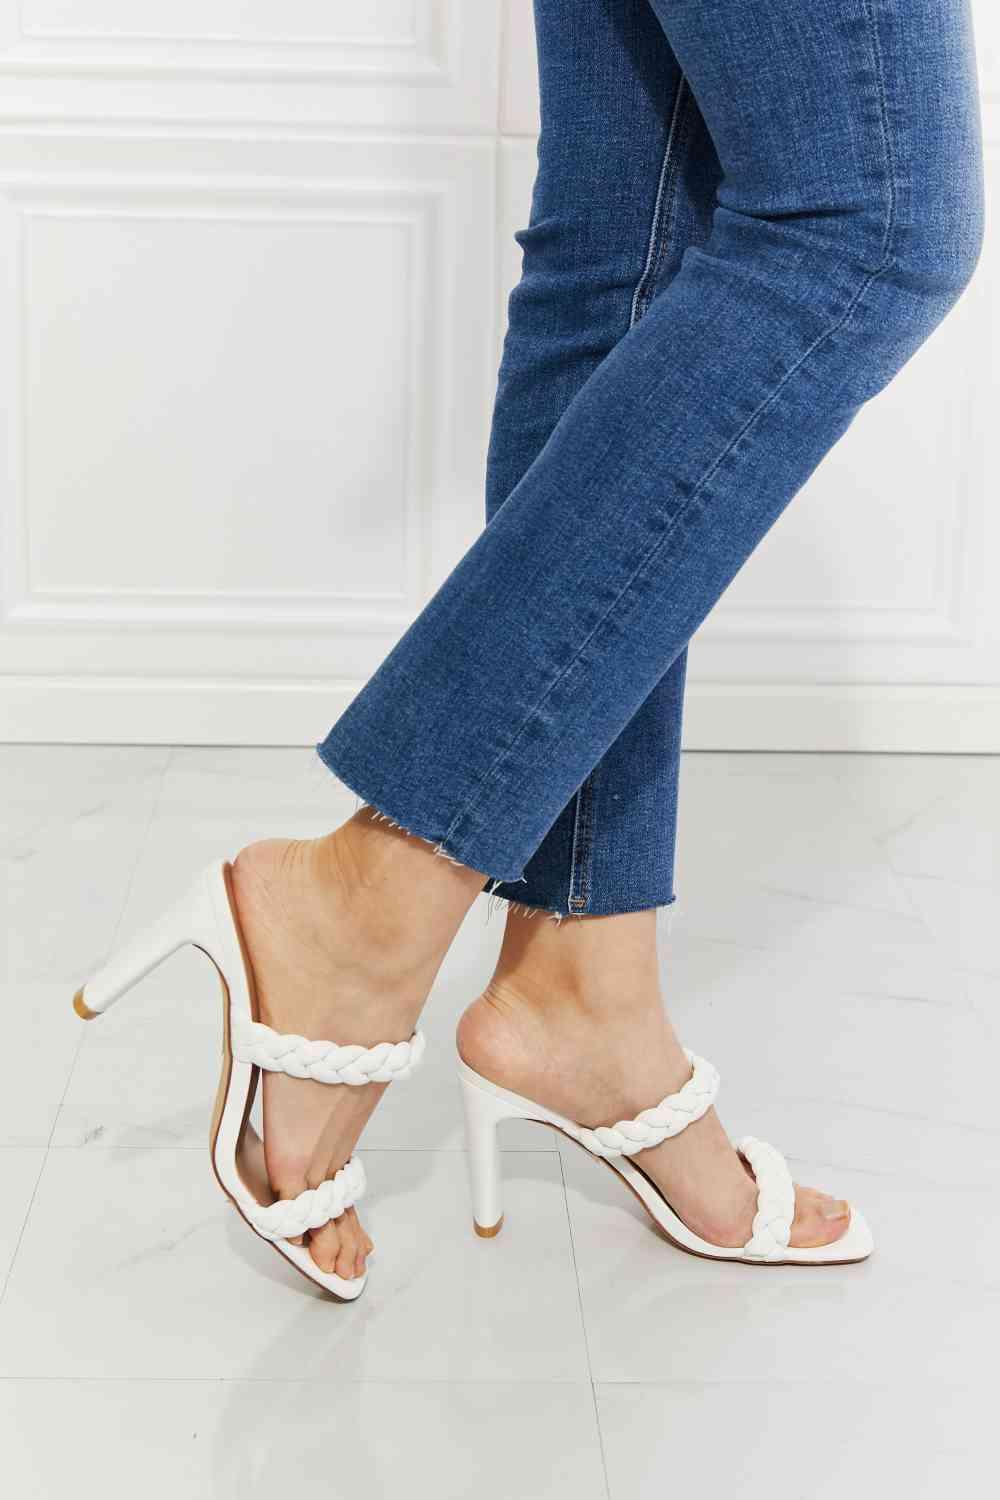 MMShoes In Love Double Braided Block Heel Sandal in White - Closet of Ren